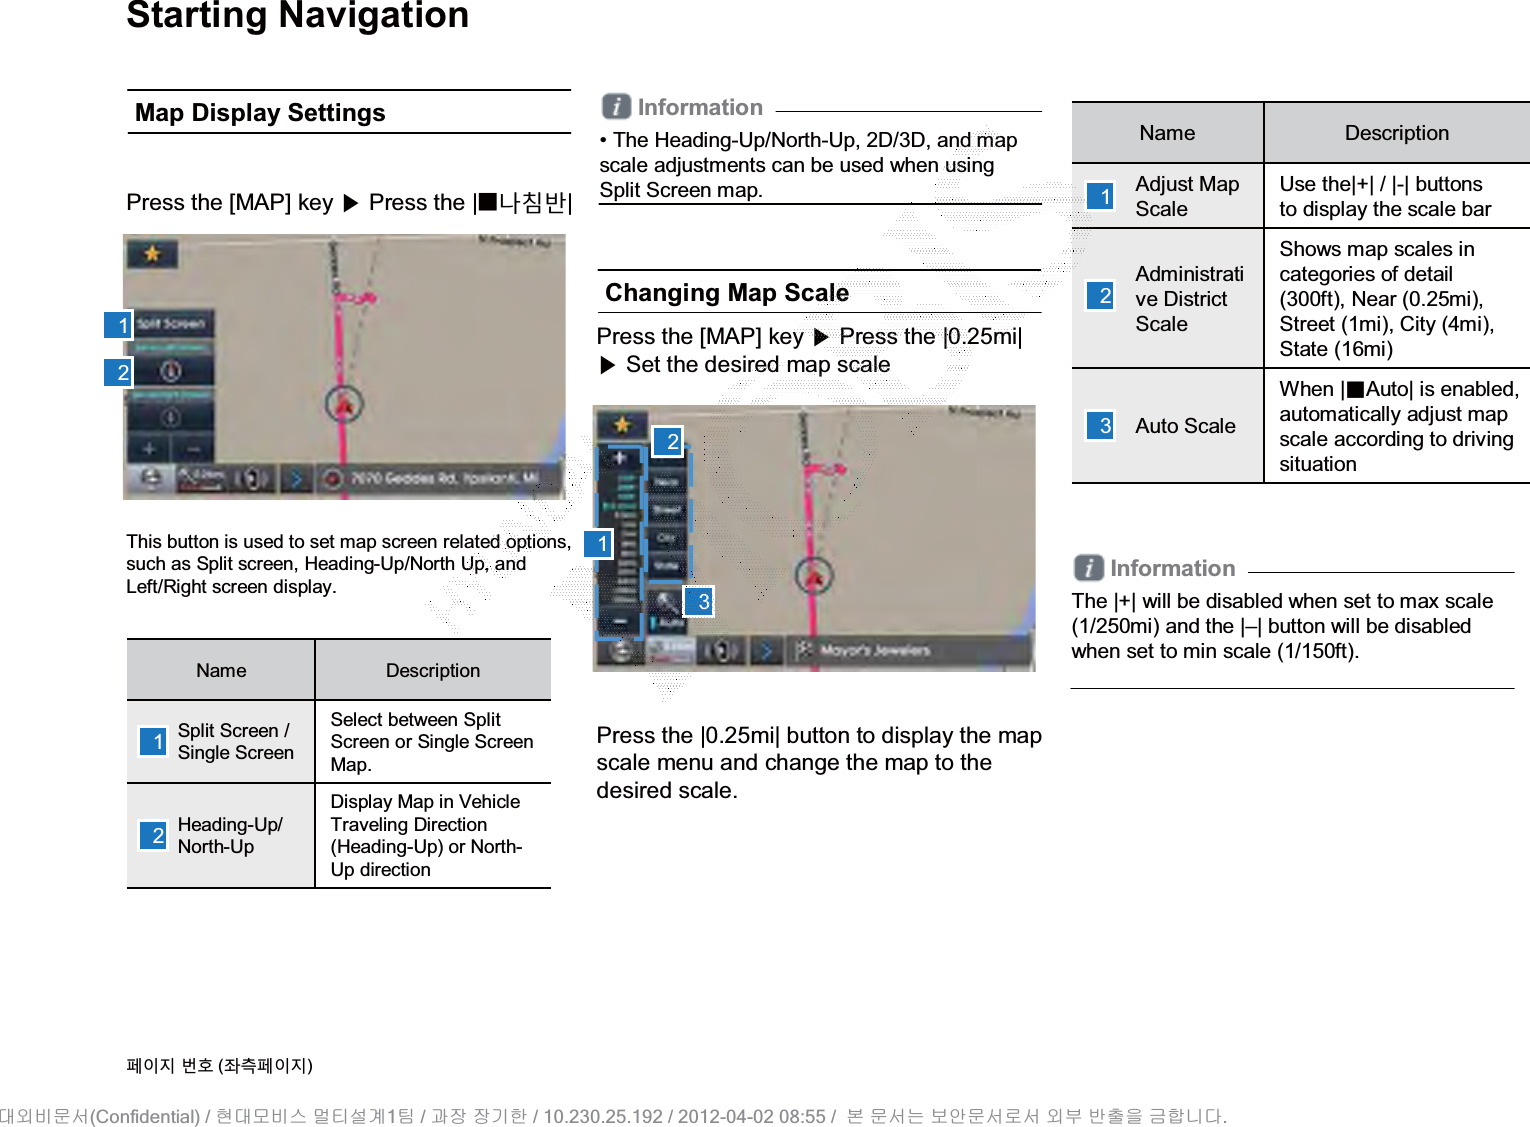 Starting NavigationPress the [MAP] key ೛Press the |̰Ο৚؆|Press the |0.25mi| button to display the map scale menu and change the map to the desired scale.This button is used to set map screen related options, such as Split screen, Heading-Up/North Up, and Left/Right screen display.Name DescriptionSplit Screen /Single ScreenSelect between Split Screen or Single Screen Map.Heading-Up/North-UpDisplay Map in Vehicle Traveling Direction (Heading-Up) or North-Up directionPress the [MAP] key ೛Press the |0.25mi|೛Set the desired map scaleName DescriptionAdjust MapScaleUse the|+| / |-| buttonsto display the scale barAdministrative District ScaleShows map scales in categories of detail (300ft), Near (0.25mi), Street (1mi), City (4mi), State (16mi)Auto ScaleWhen |ȿAuto| is enabled,automatically adjust mapscale according to drivingsituationMap Display SettingsChanging Map Scale1212123123૓ࢇए ء୎ (্ࣛ૓ࢇए)Information• The Heading-Up/North-Up, 2D/3D, and map scale adjustments can be used when using Split Screen map.InformationThe |+| will be disabled when set to max scale (1/250mi) and the |–| button will be disabled when set to min scale (1/150ft).(Confidential) /    1  /     / 10.230.25.192 / 2012-04-02 08:55 /             .␴㞬⽸ⱬ㉐ 䜸␴⯜⽸㏘ ⭴䐤㉘᷸ 䐴 Ḱ㣙 㣙ὤ䚐 ⸬ ⱬ㉐⏈ ⸨㙼ⱬ㉐⦐㉐ 㞬⺴ ⵌ㻐㡸 Ἴ䚝⏼␘